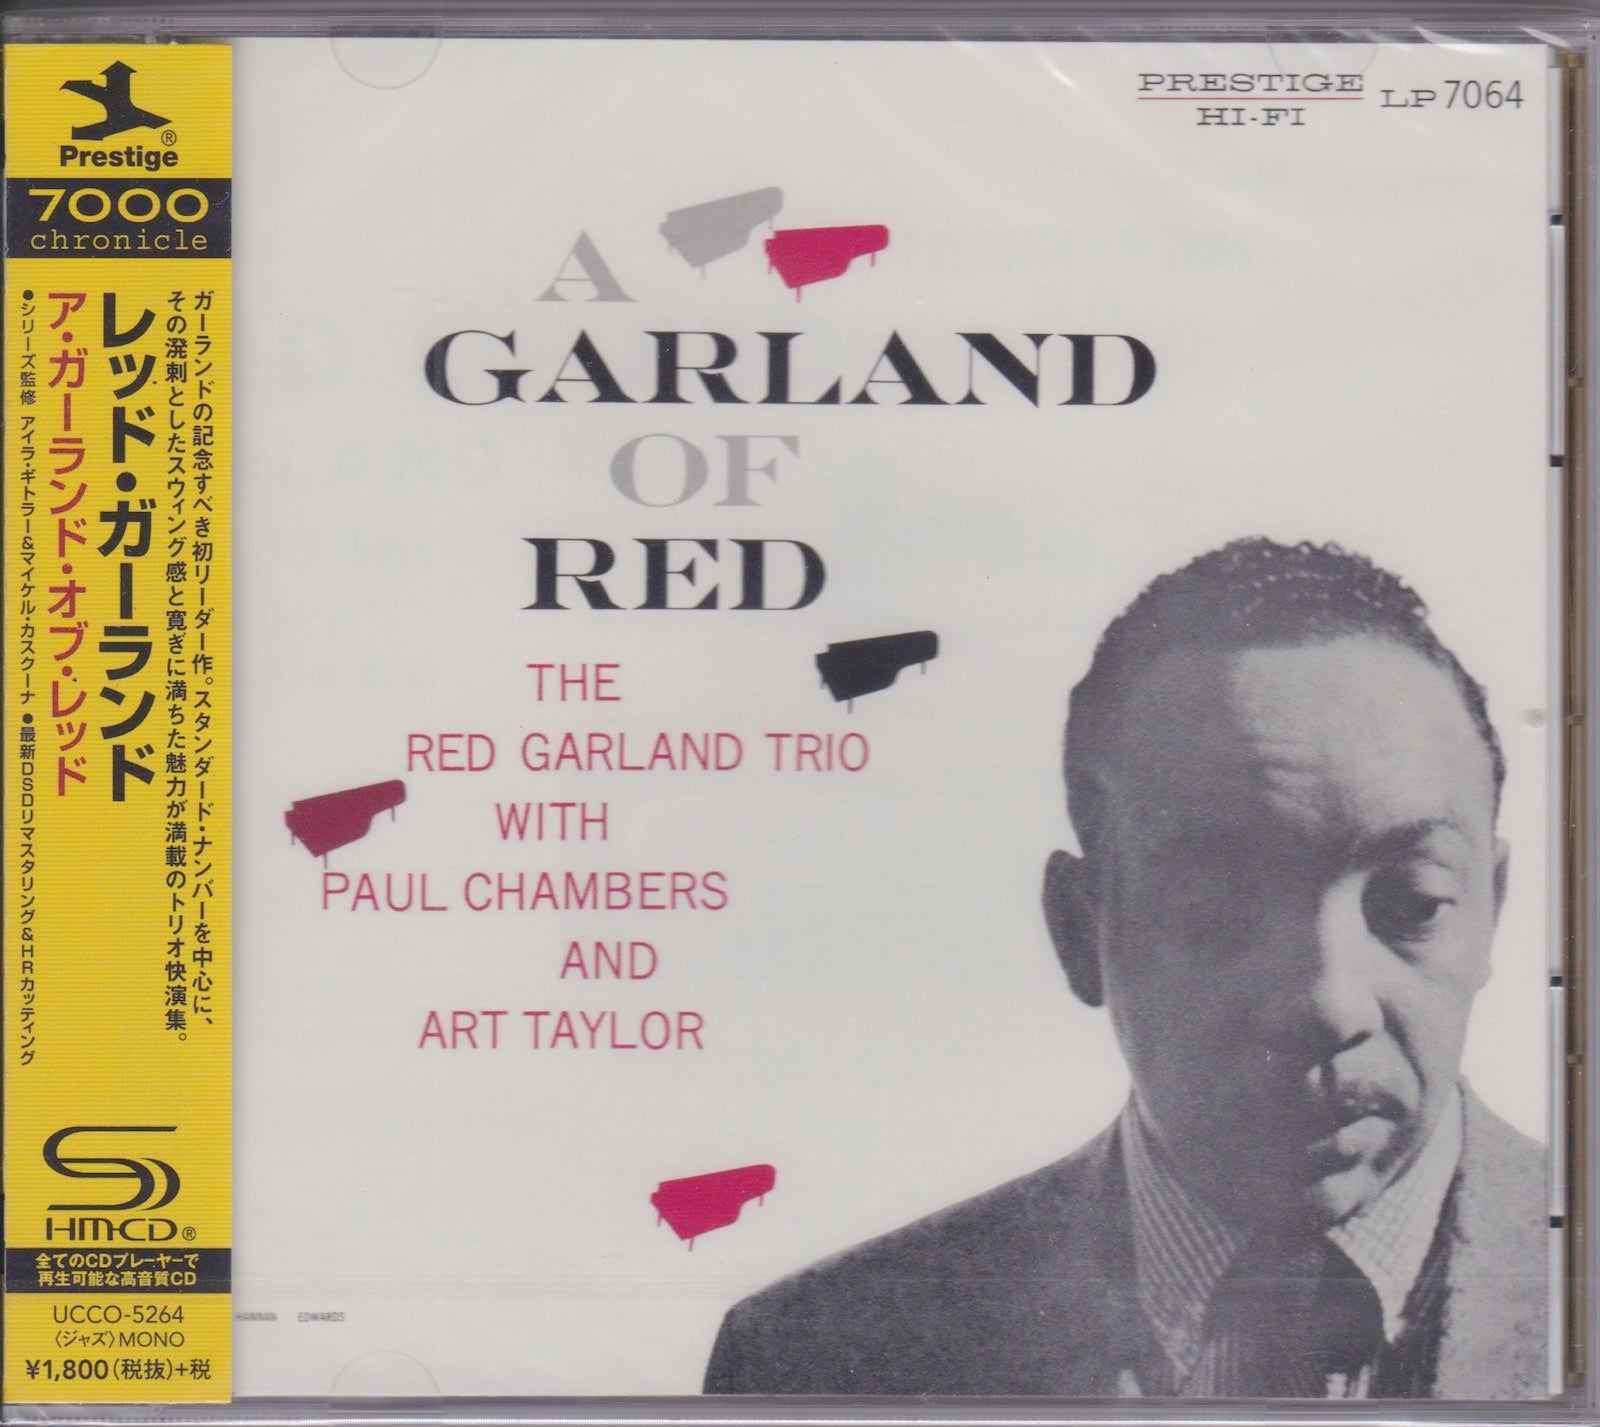 The Red Garland Trio - A Garland Of Red